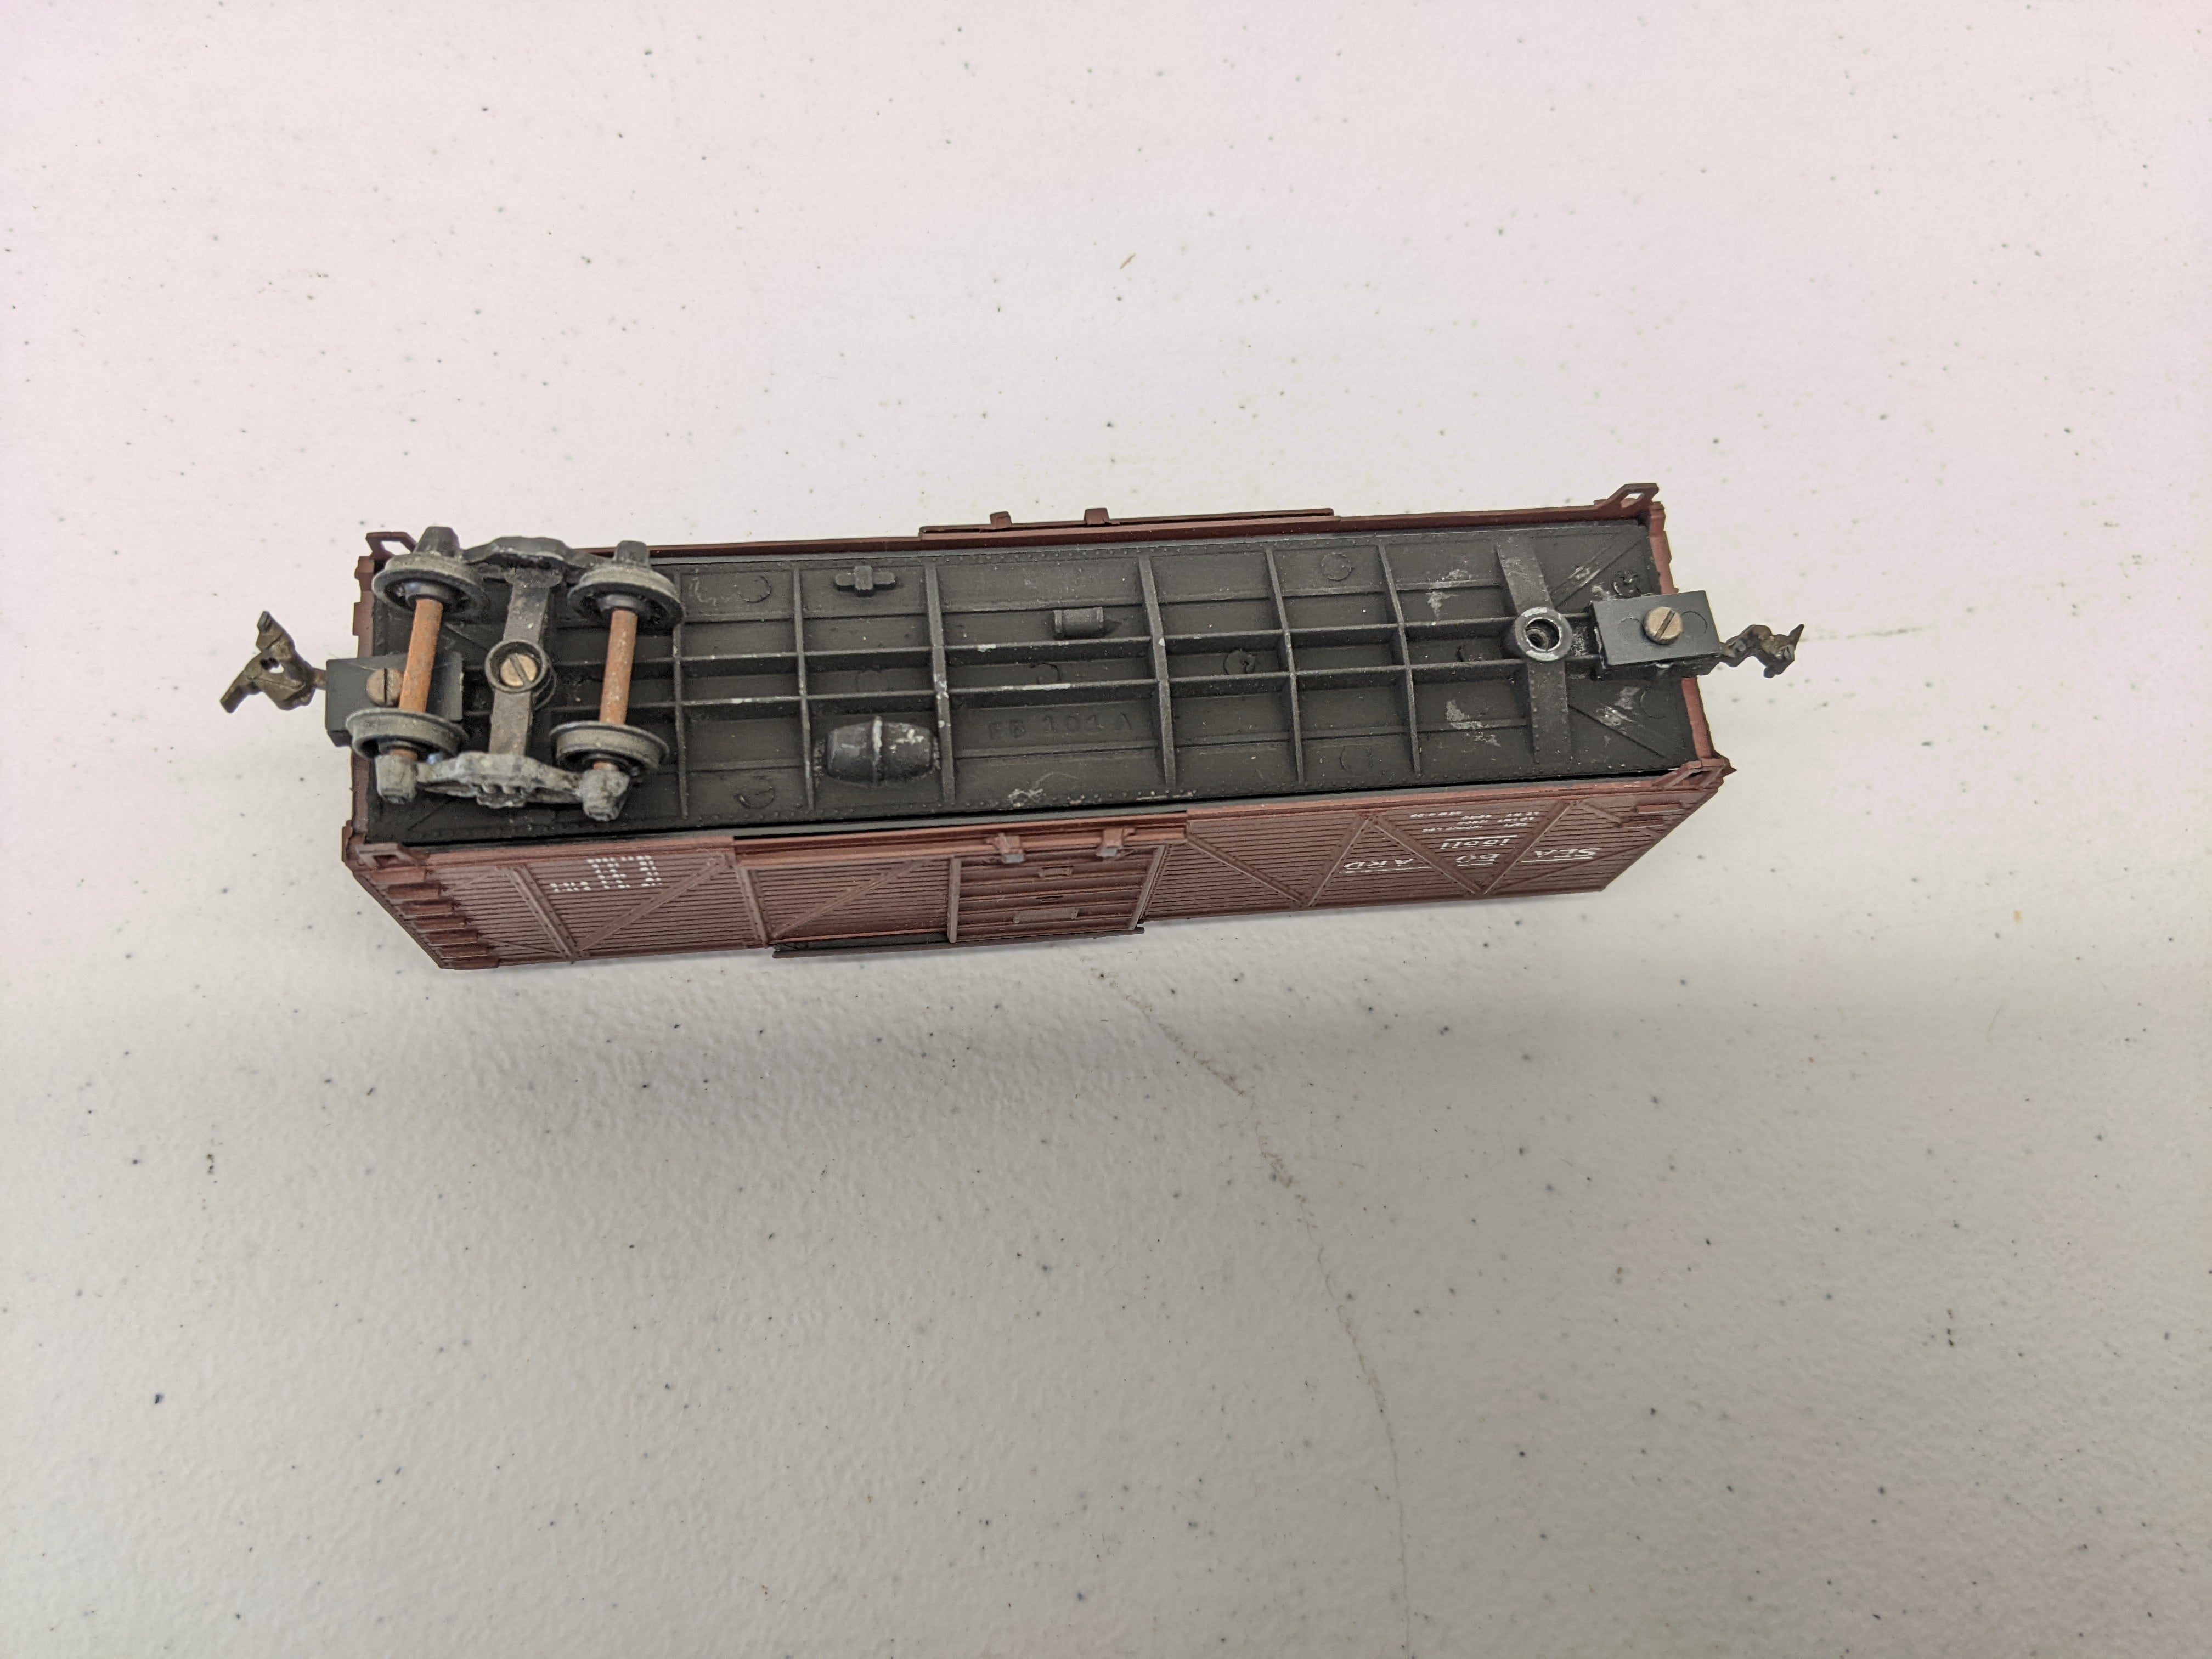 USED Unbranded HO Scale, 40' Wooden Box Car, Seaboard #15511